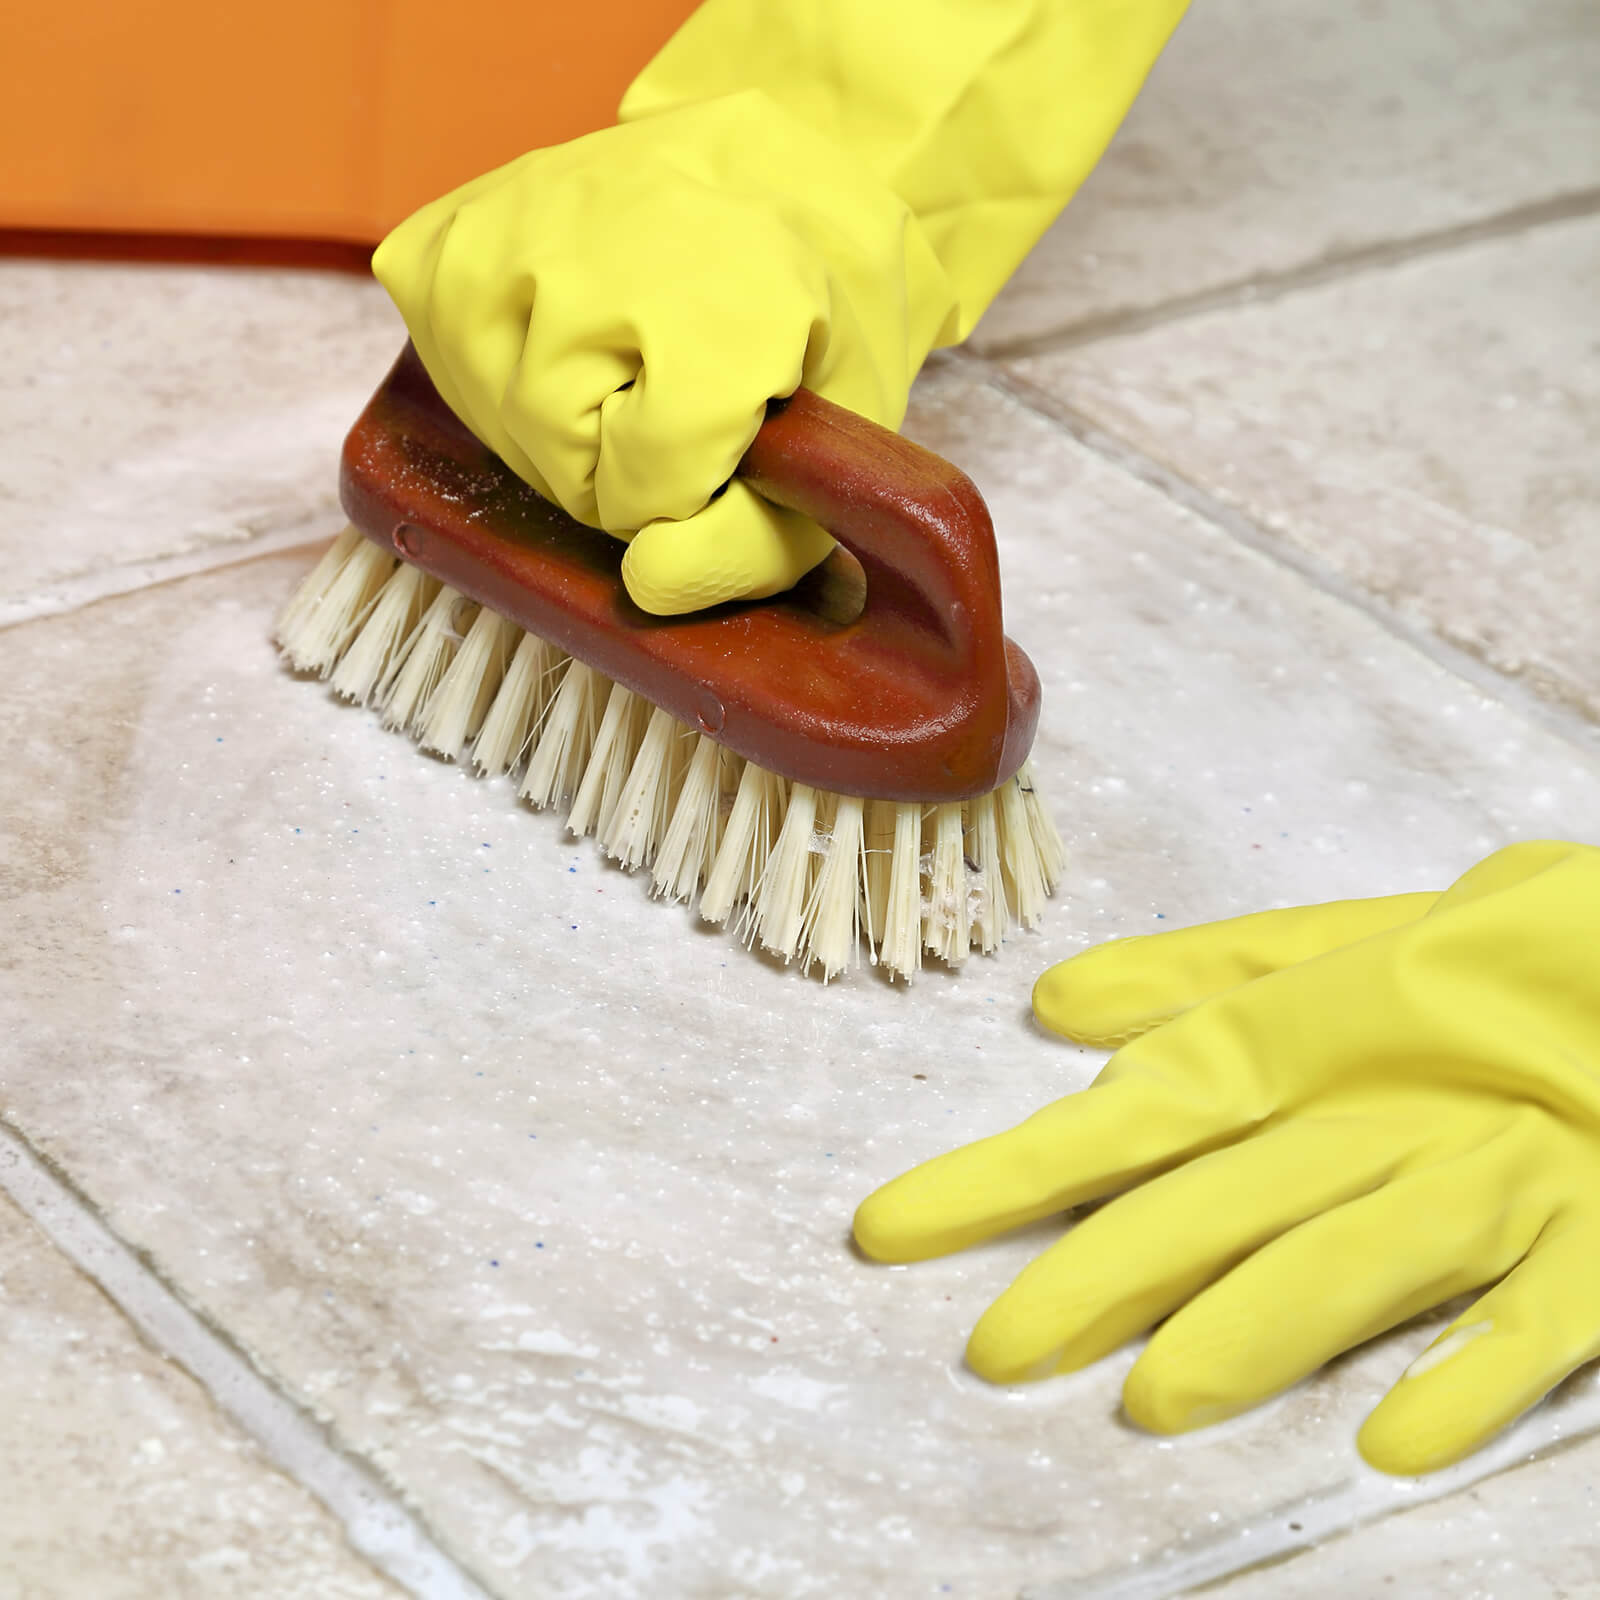 Tile Cleaning | Christian Brothers Flooring & Interiors.